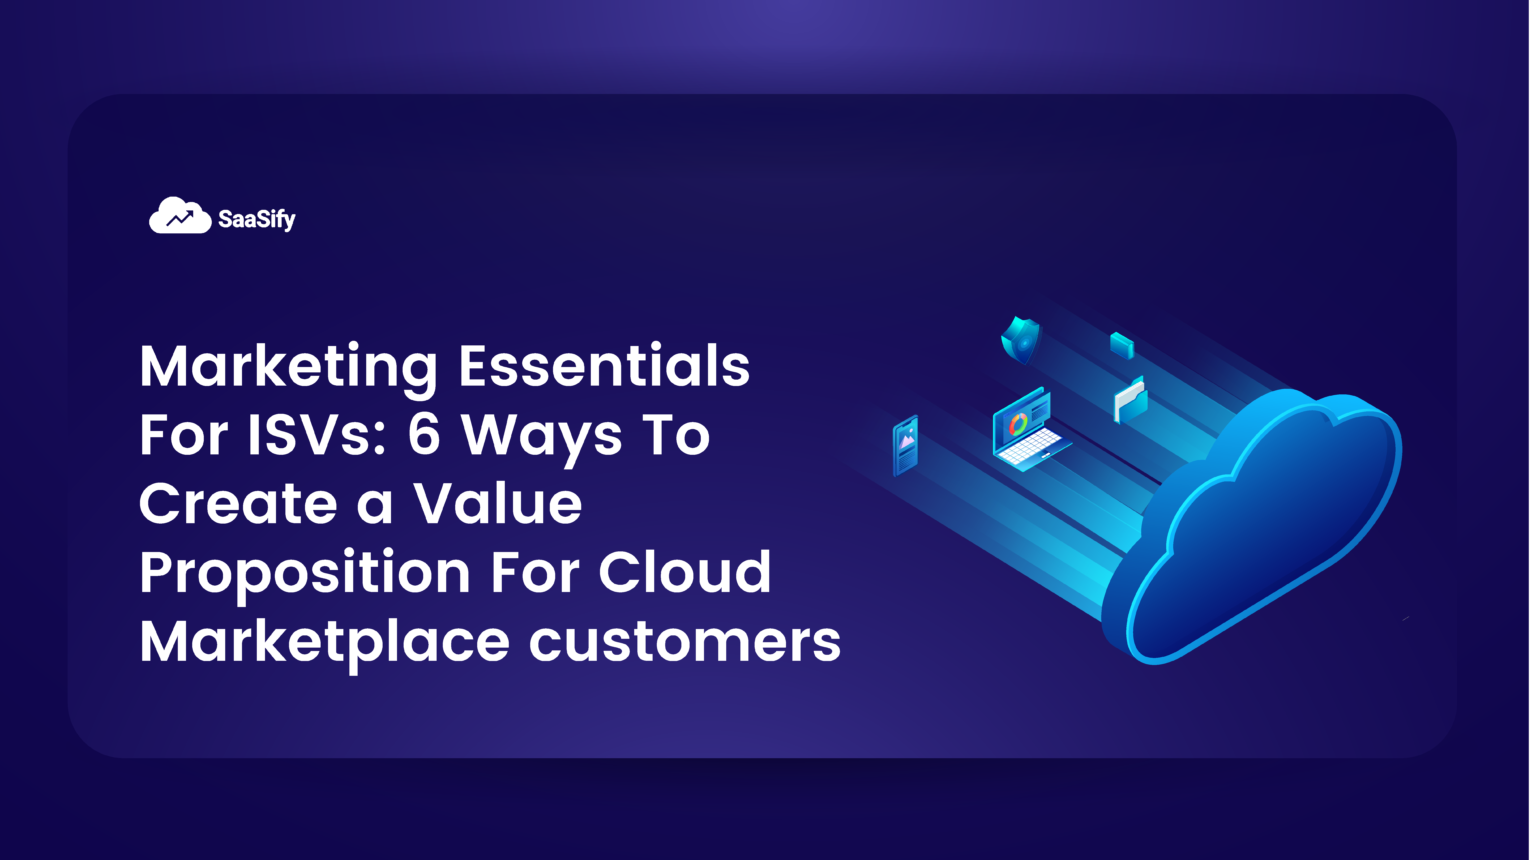 Marketing essentials for ISVs: 6 ways to create a value proposition for cloud marketplace customers